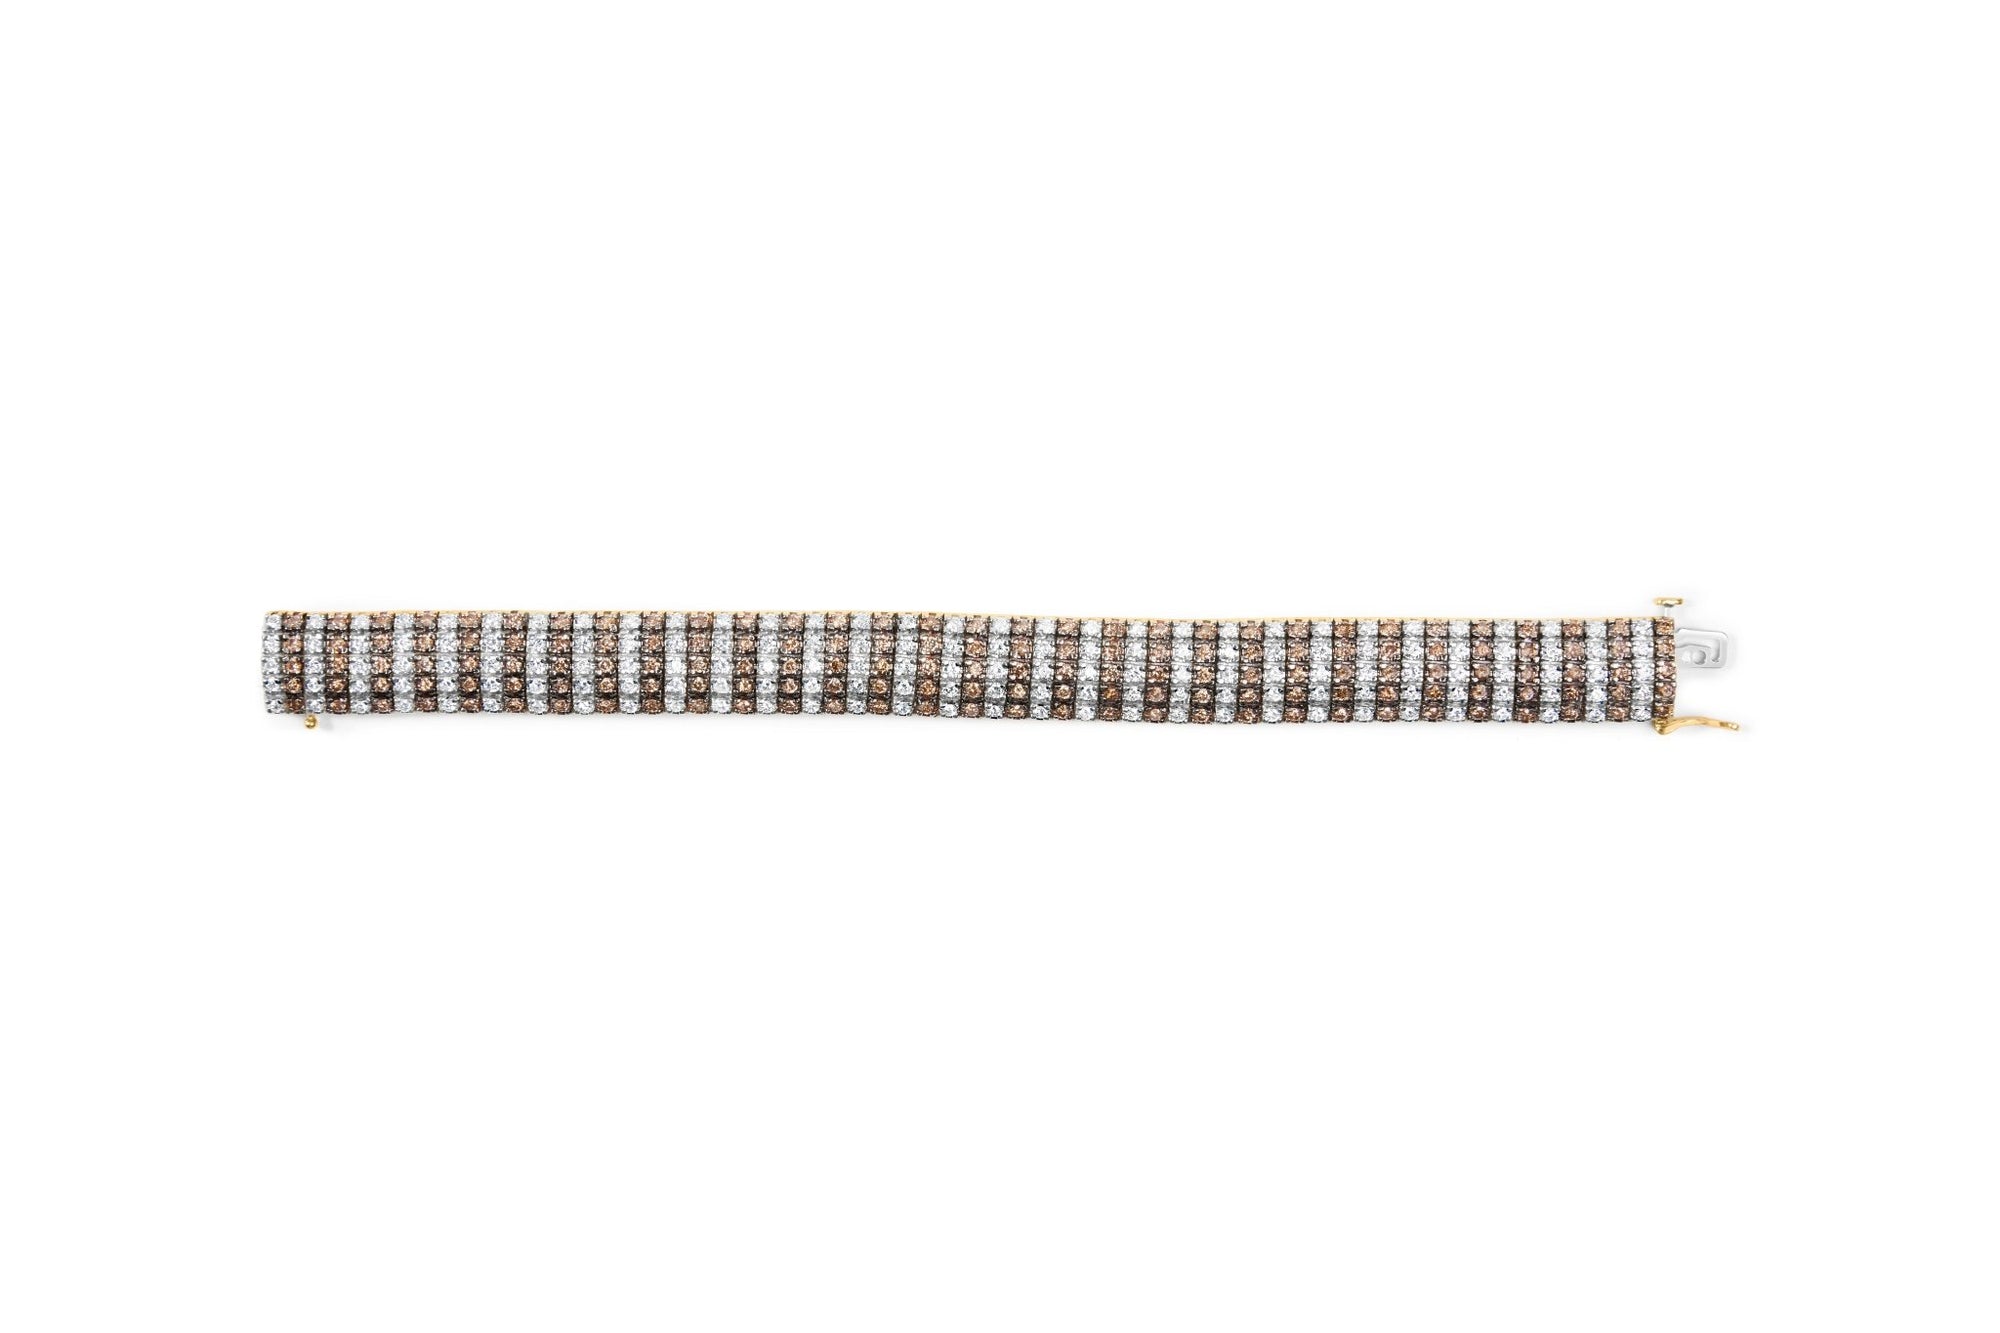 10K Yellow Gold 10 CTW 1/3 Cttw Alternating Coco Color and White Diamond 5 Row Tennis Bracelet (Brown/H-I Color, SI1-SI2 Clarity) - Size 7.25 - LinkagejewelrydesignLinkagejewelrydesign